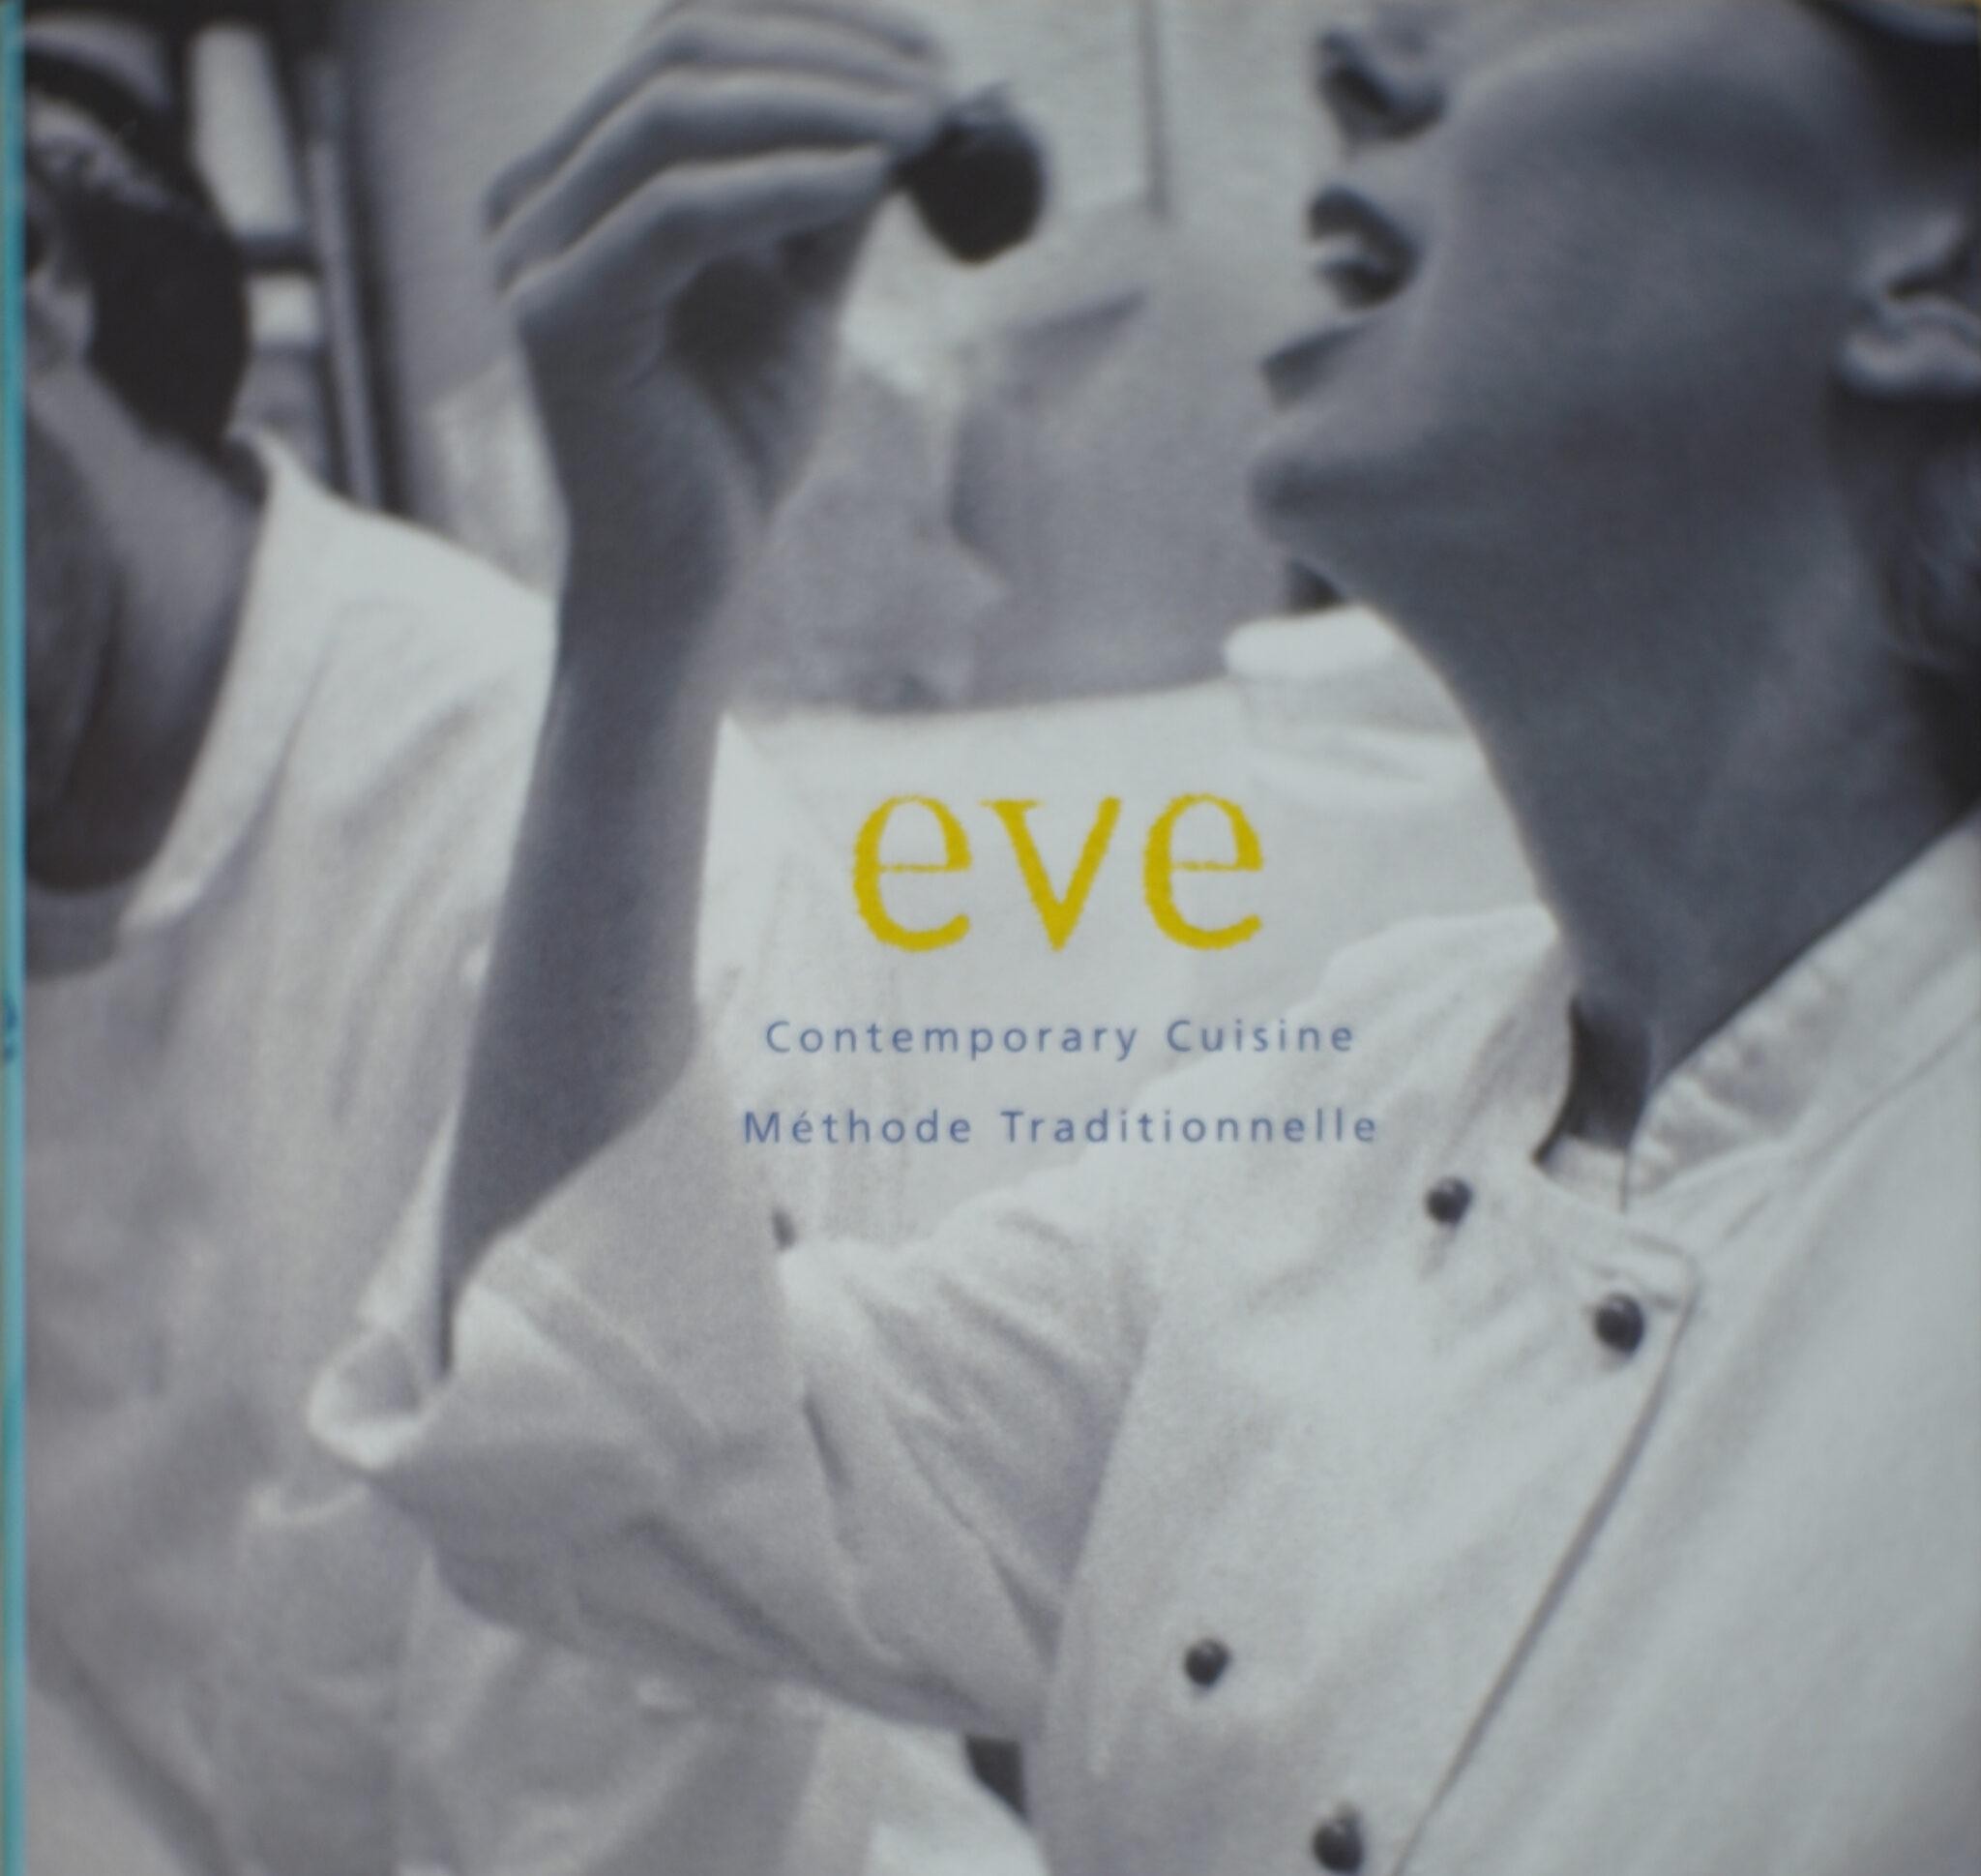 Our Nationally Acclaimed Eve Cookbook